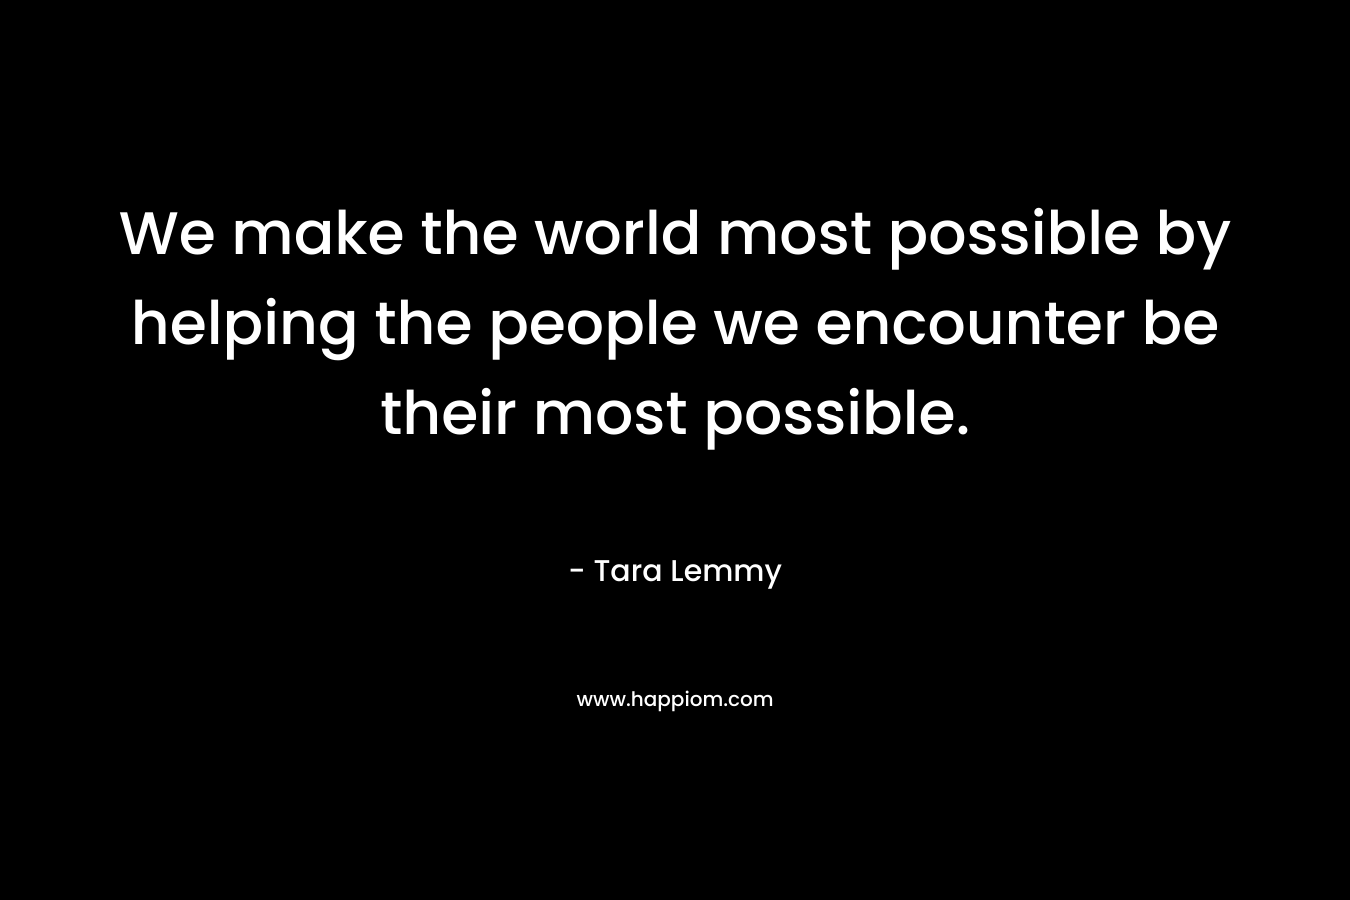 We make the world most possible by helping the people we encounter be their most possible.